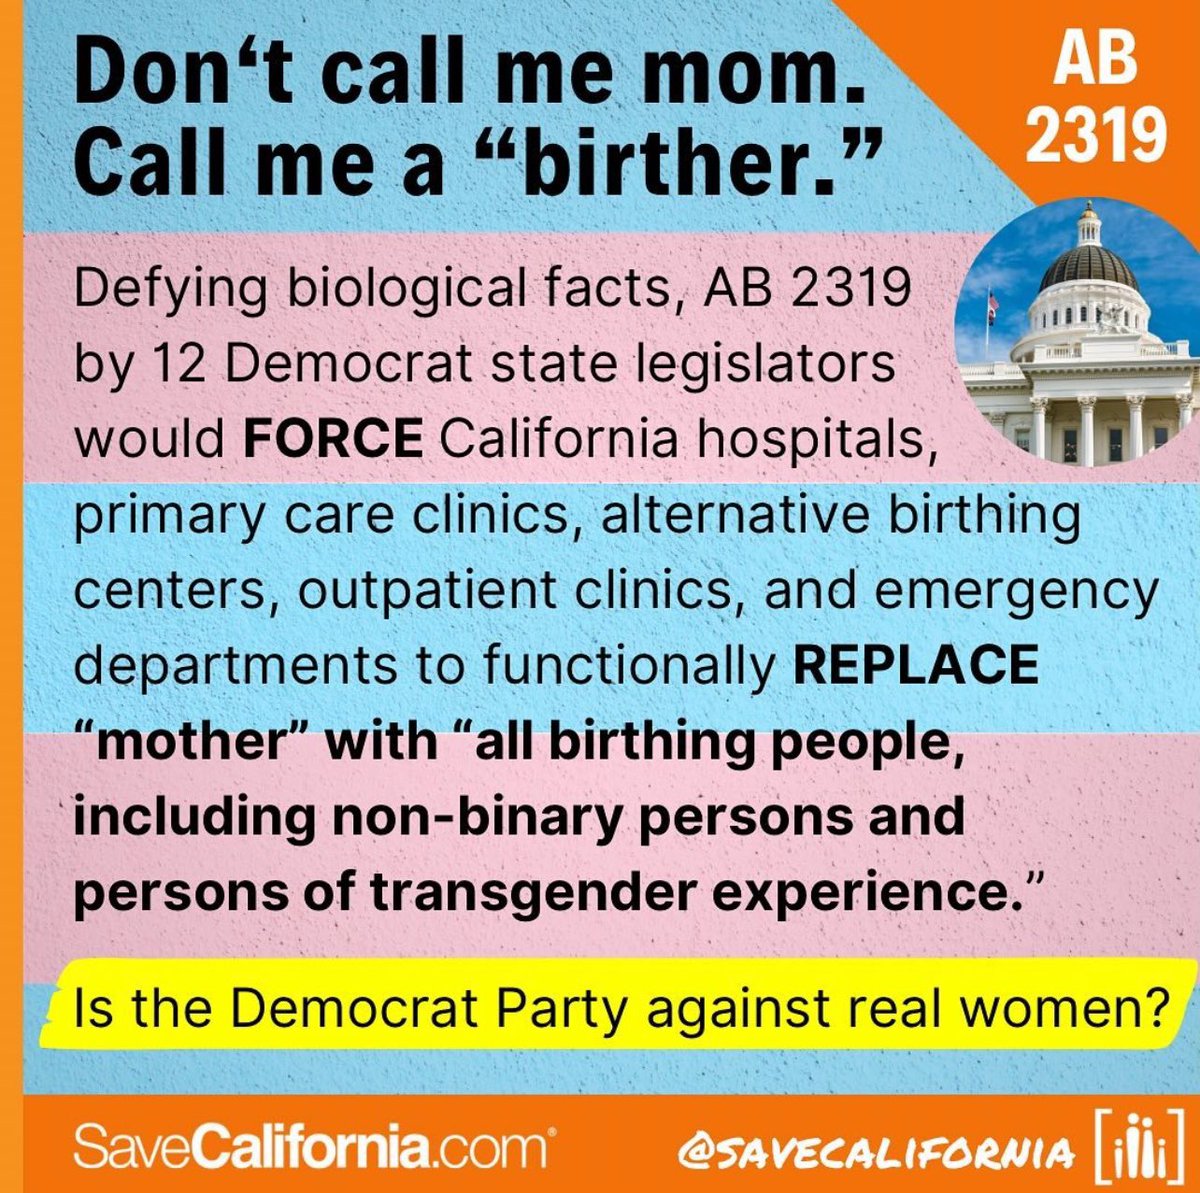 I’m a “Mother” NOT a birther. Democrats are against biological women. They say that “their party is for women” but in actuality they are trying to erase us. Do you agree?